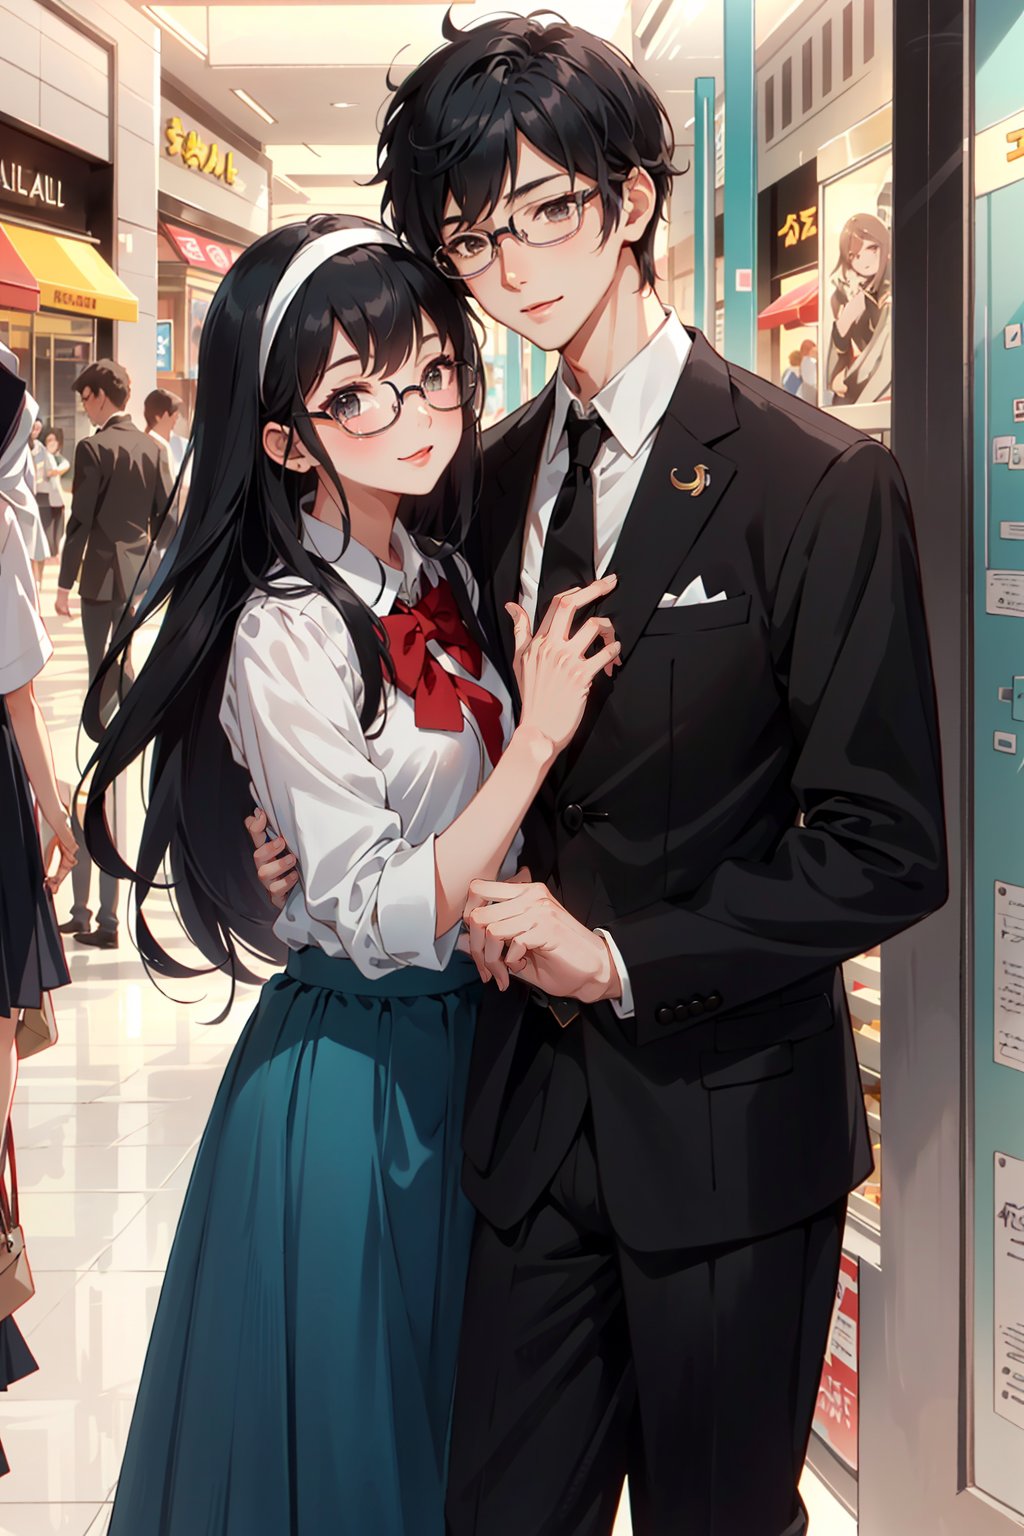 16K, HD, mastepiece, 2people, couple, tall calm school guy, short beautiful muslim girl wearing and long skirt, glasses, young, school uniform, mall date, romantic_duo, romance_theme, cute couple, detailed background detailed mouth, detailed face, happy face, 